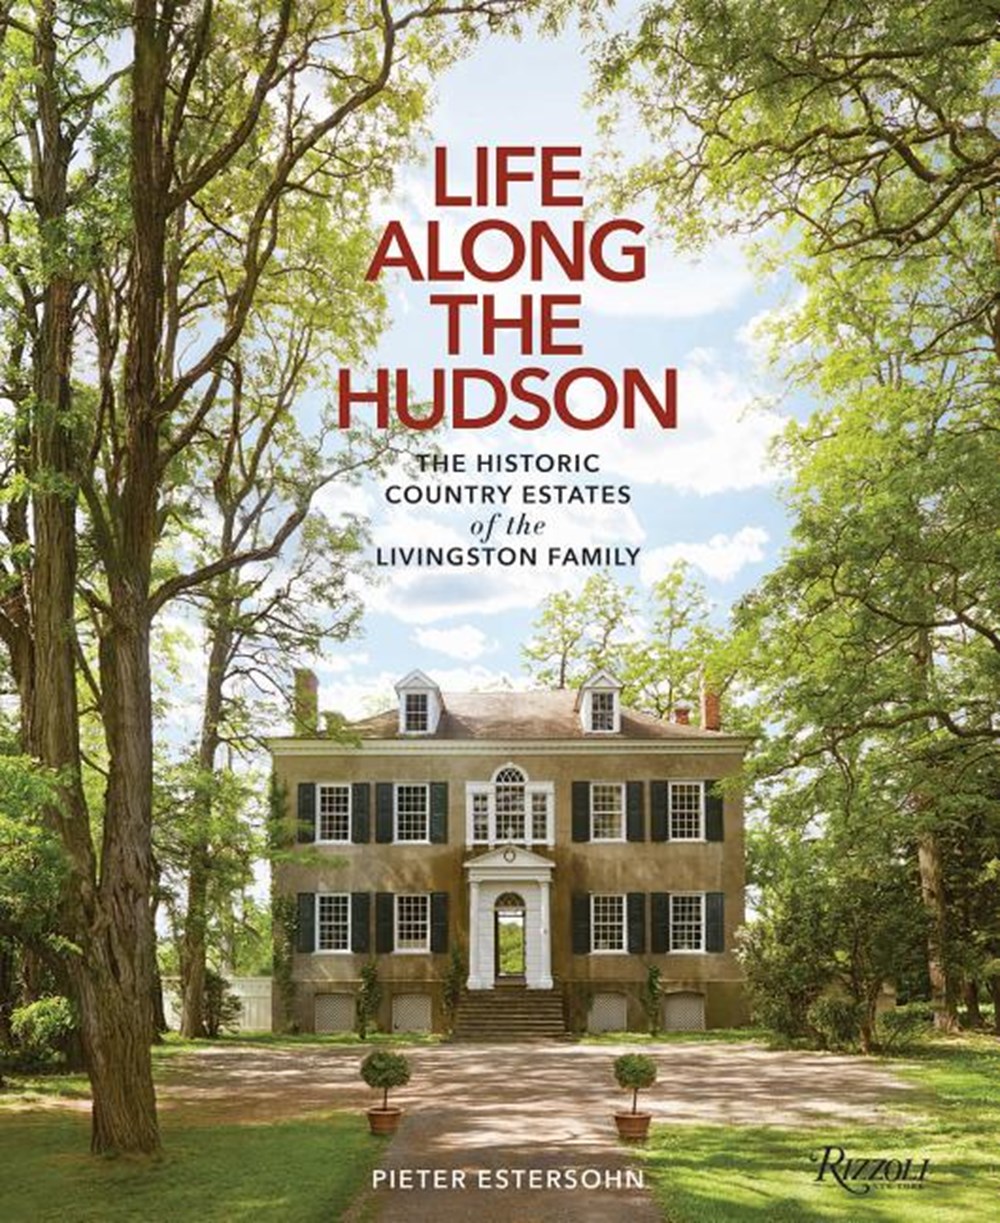 Life Along the Hudson: The Historic Country Estates of the Livingston Family